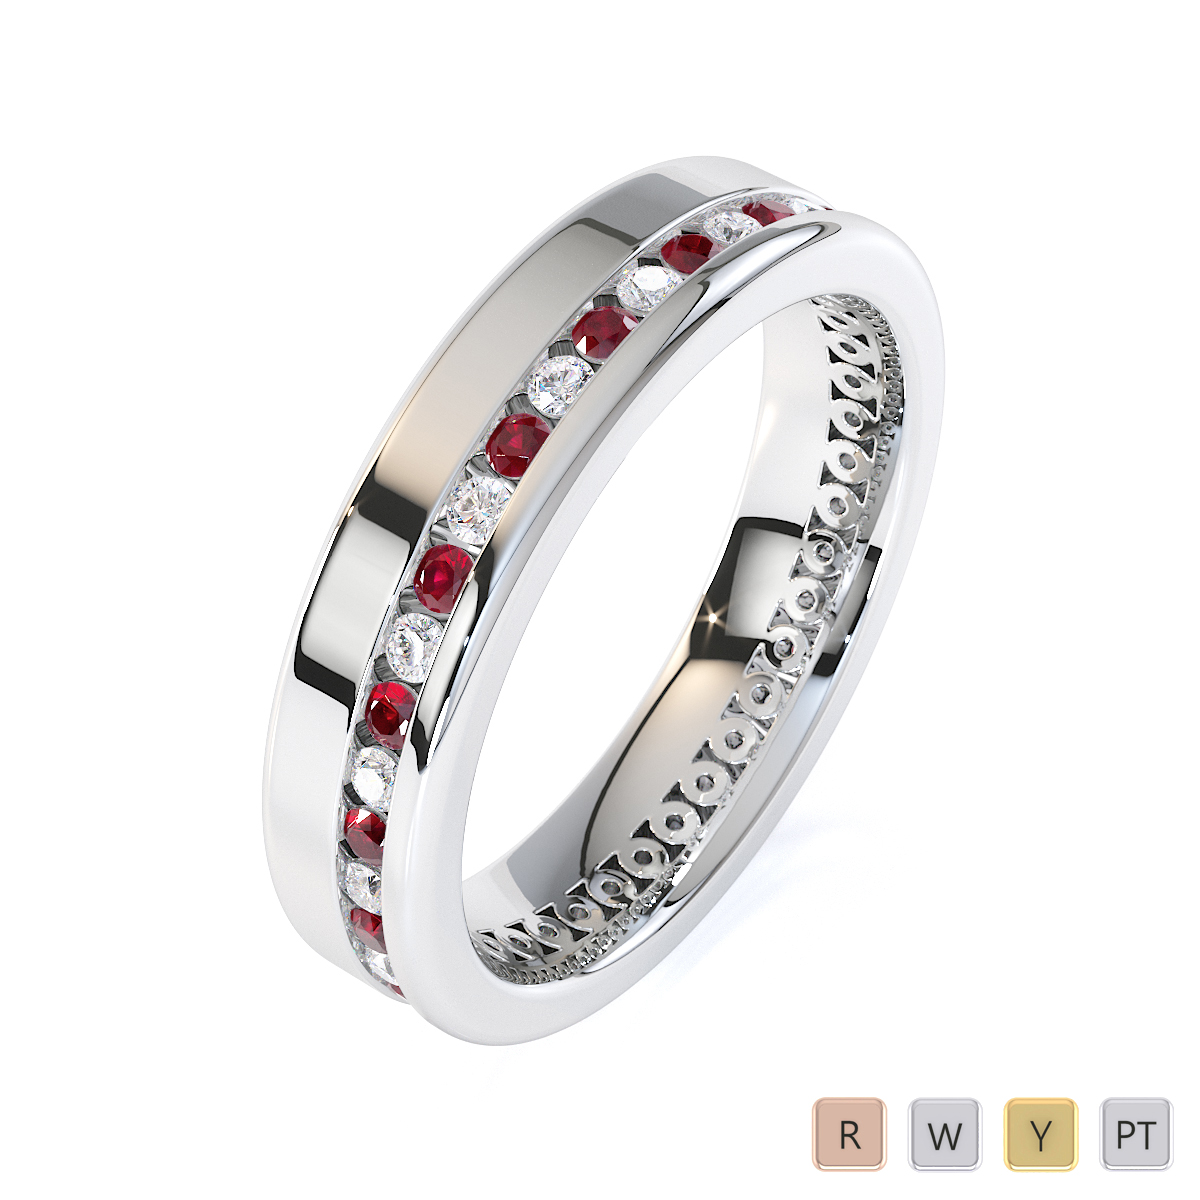 Round Cut Diamond and Ruby Full Eternity Ring in Gold / Platinum ATZR-0438